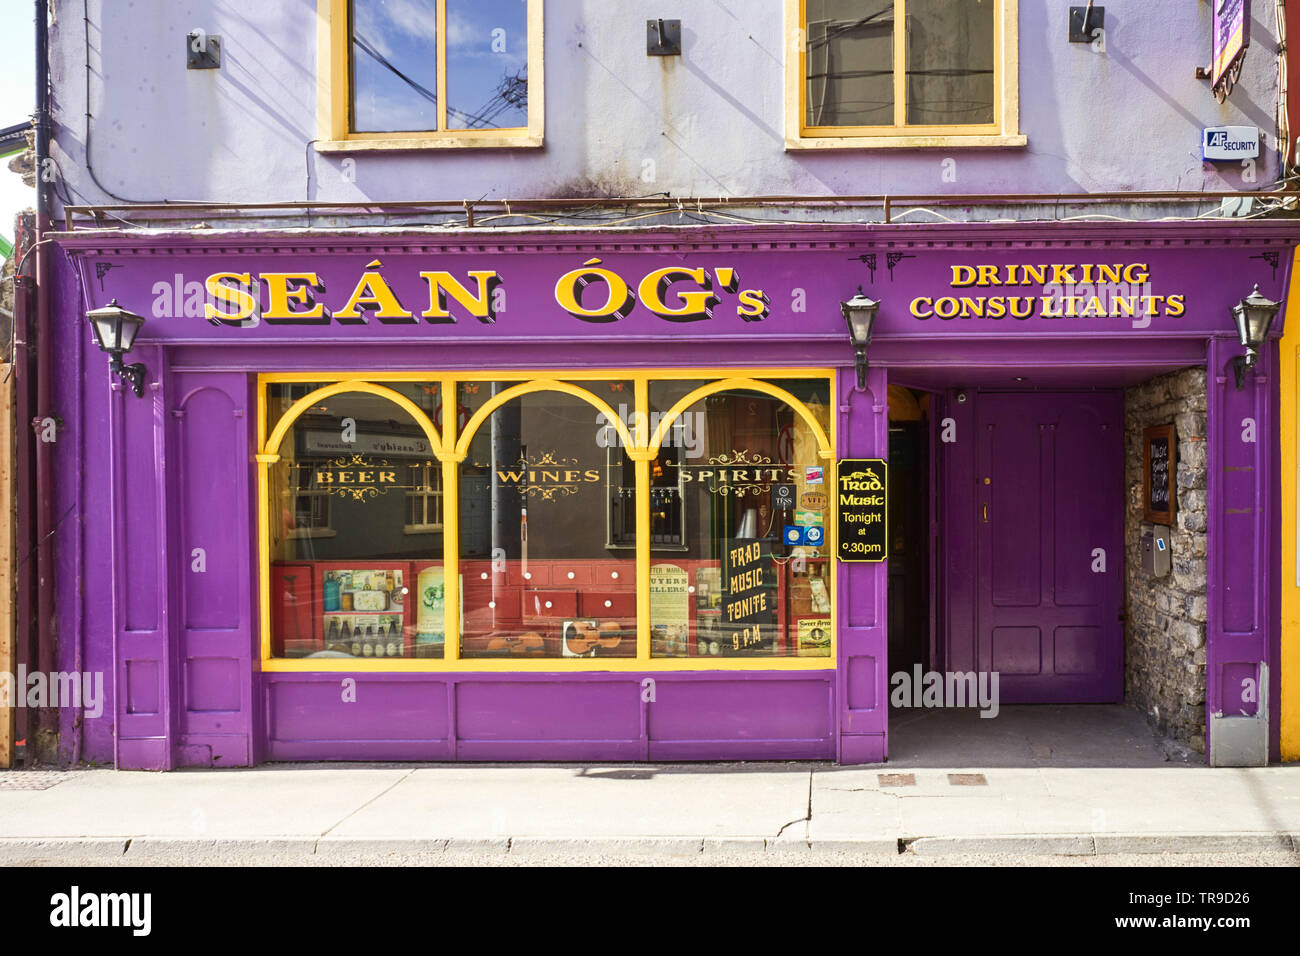 The drinking consultant Sean Og’s traditional Irish pub in Tralee, County Kerry, Ireland Stock Photo